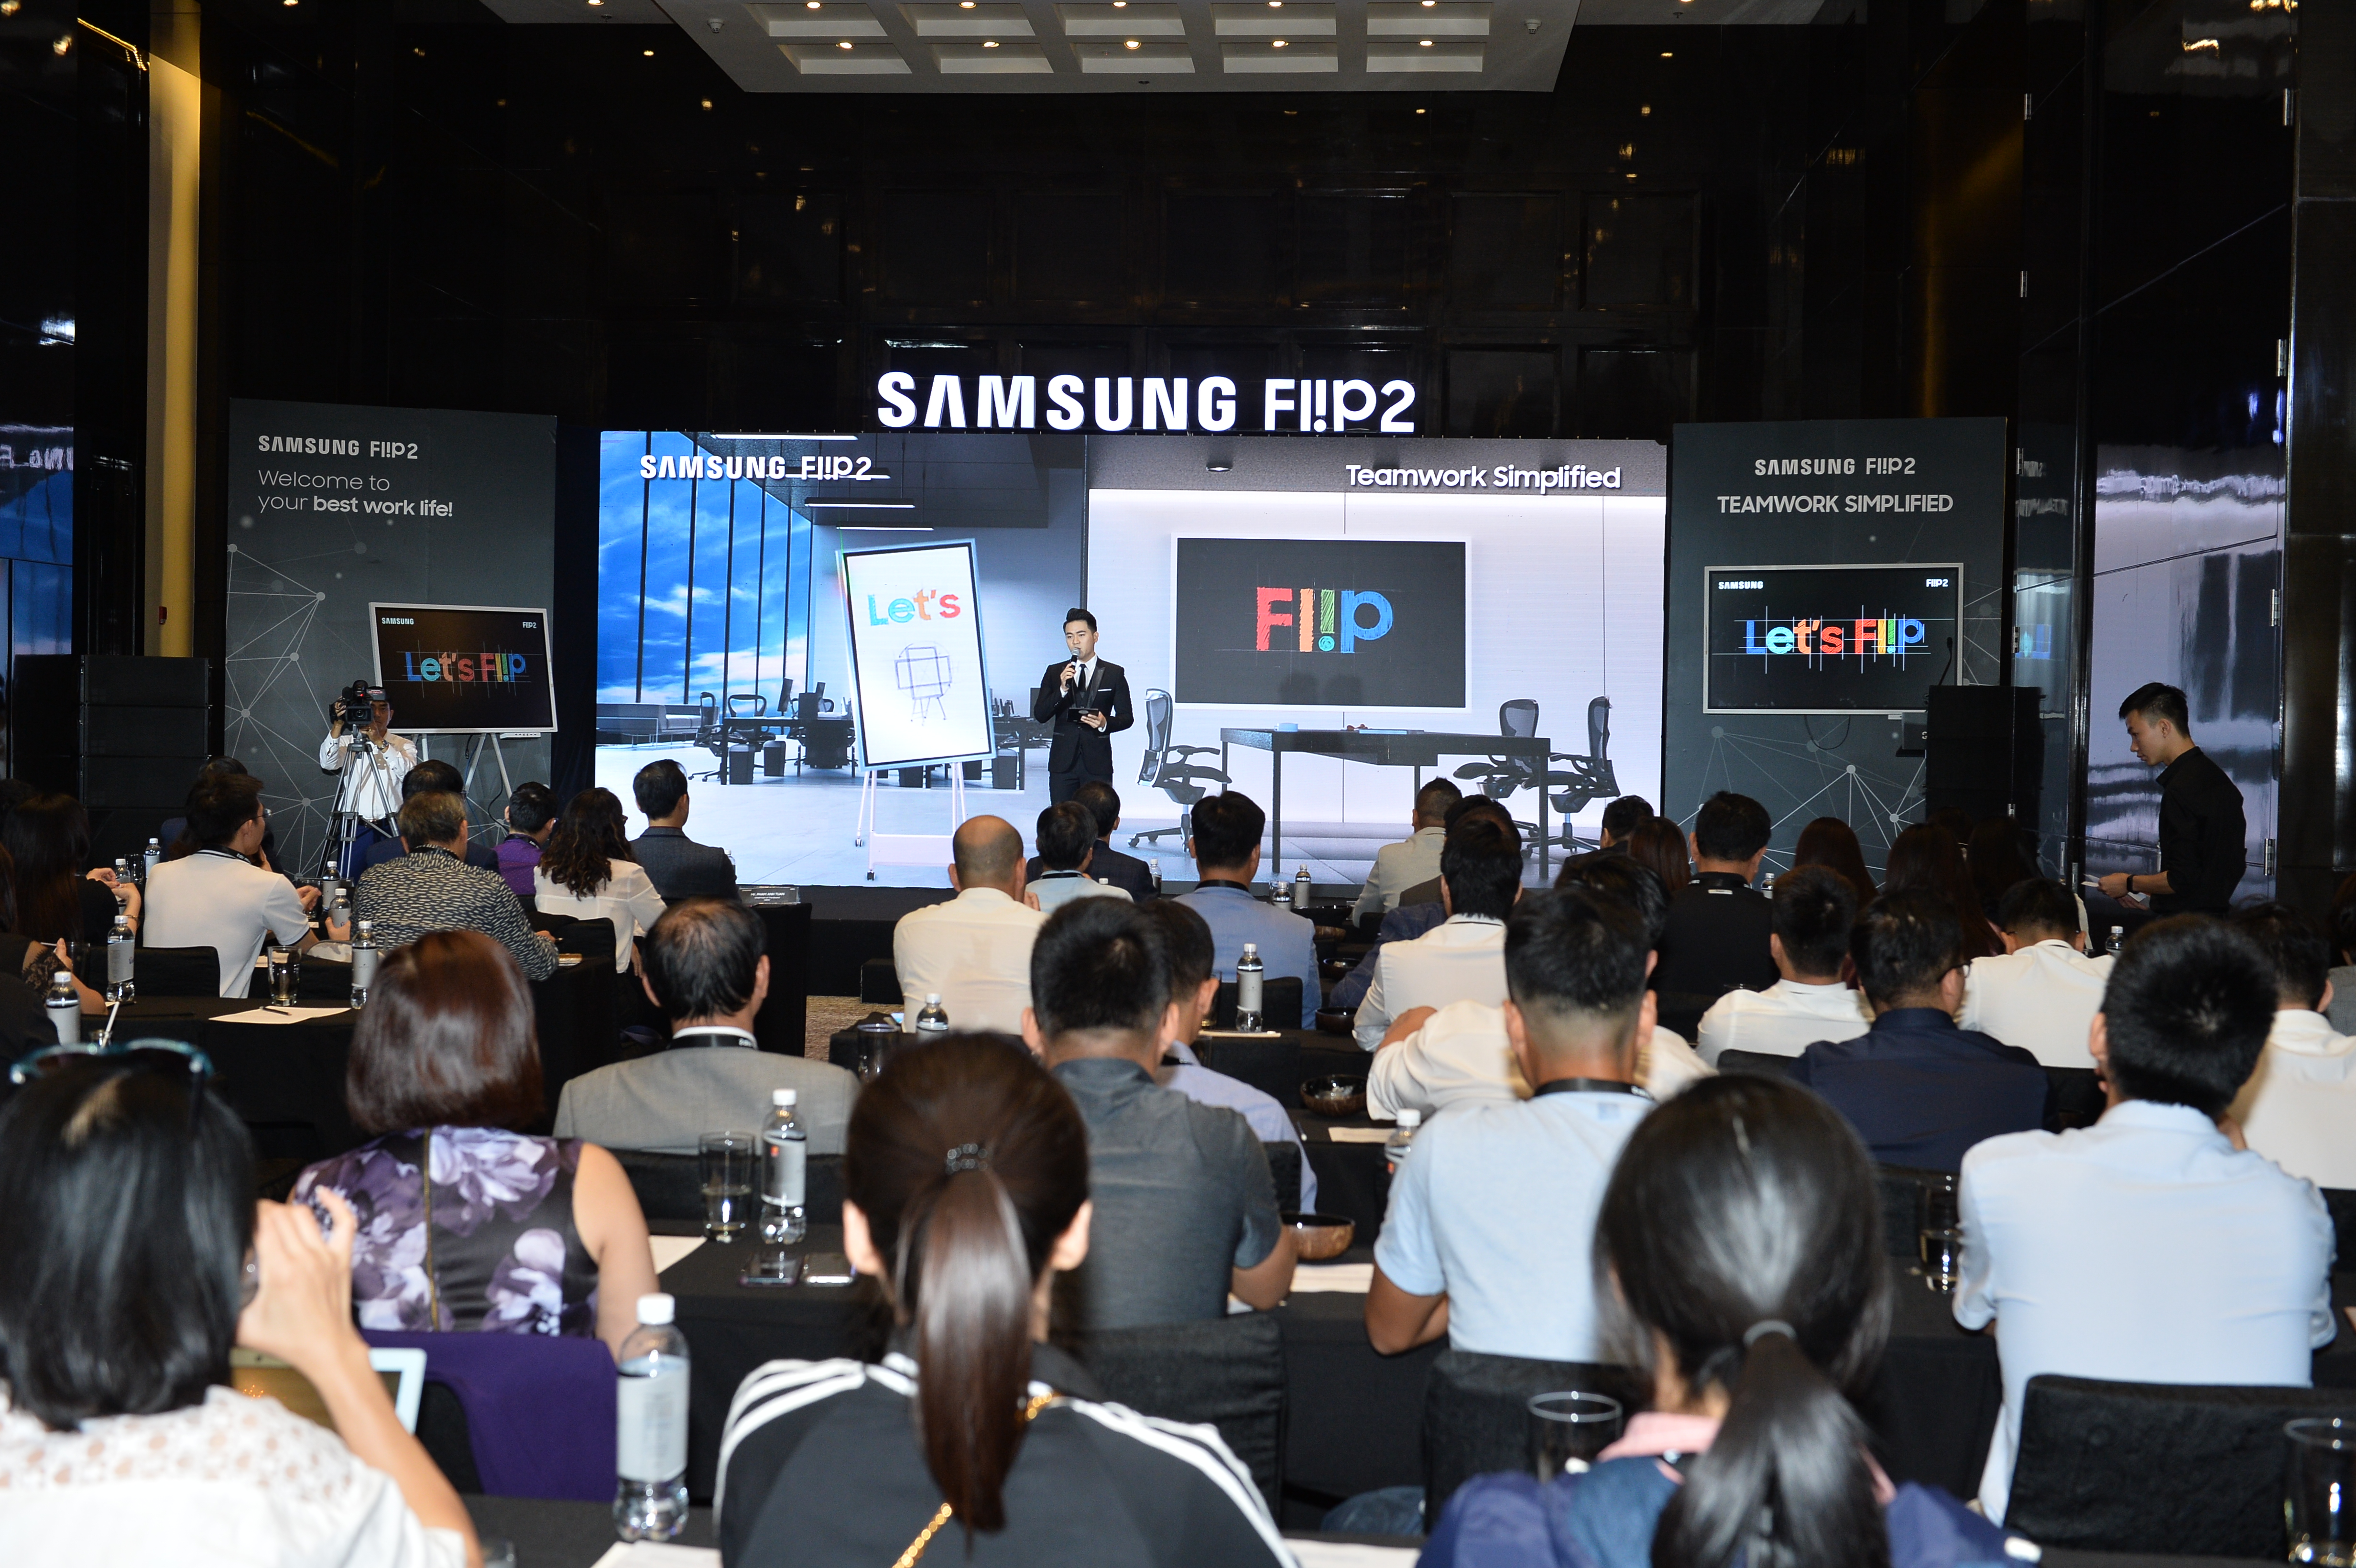 CMS cooperates with Samsung Vina to launch Samsung Flip 2